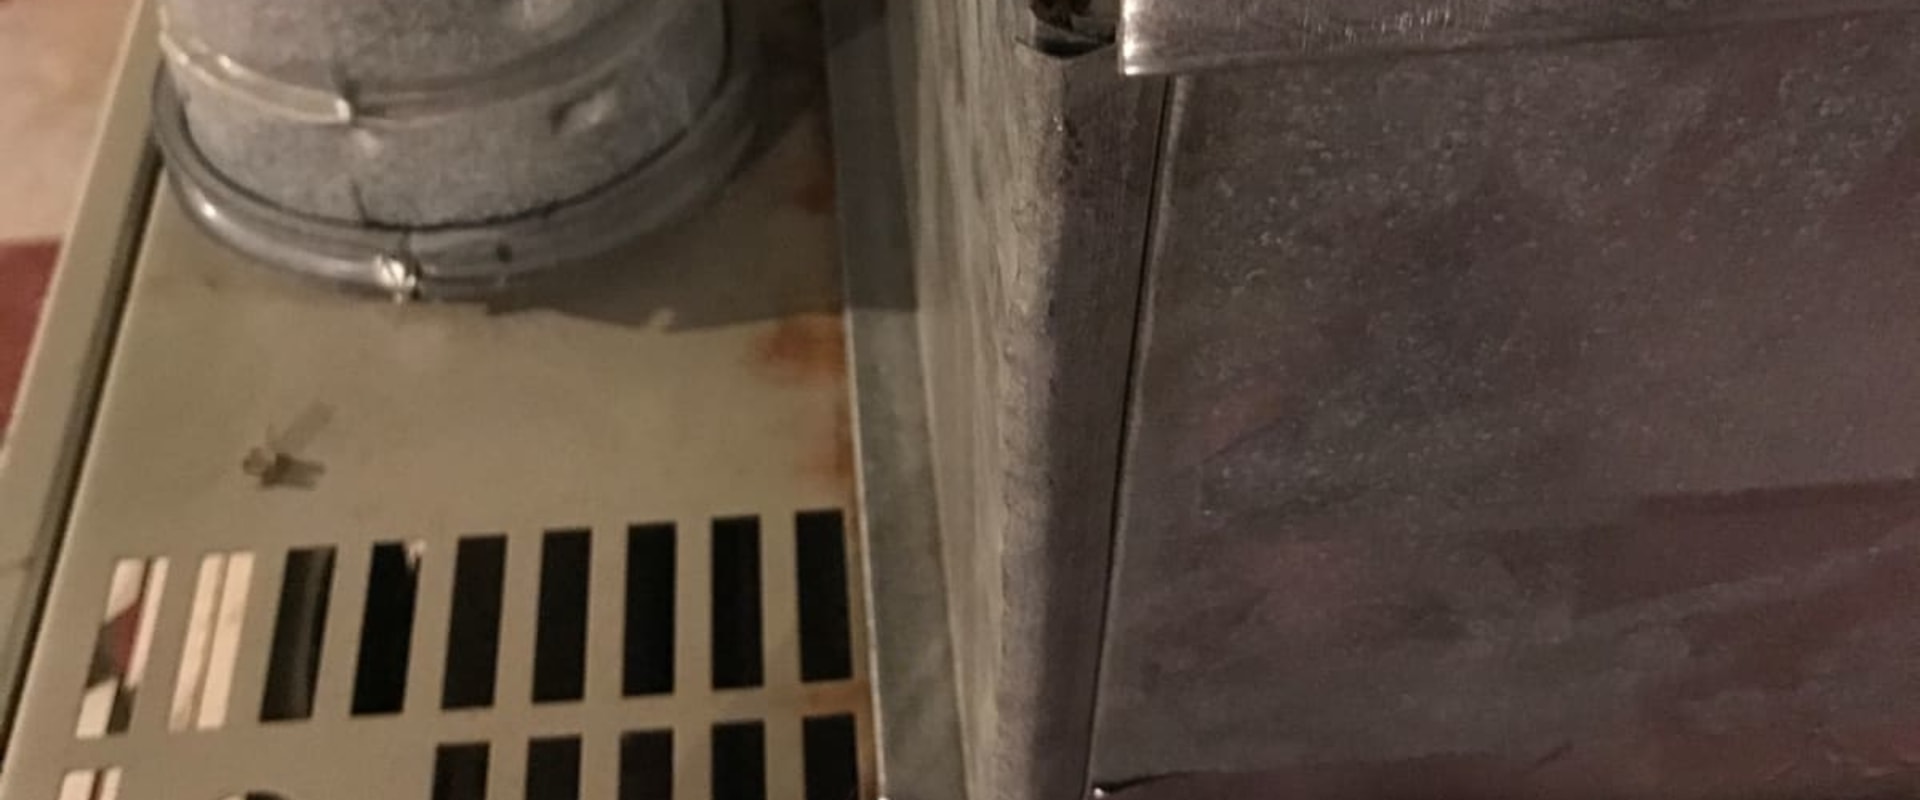 How should ductwork be sealed against air leaks?